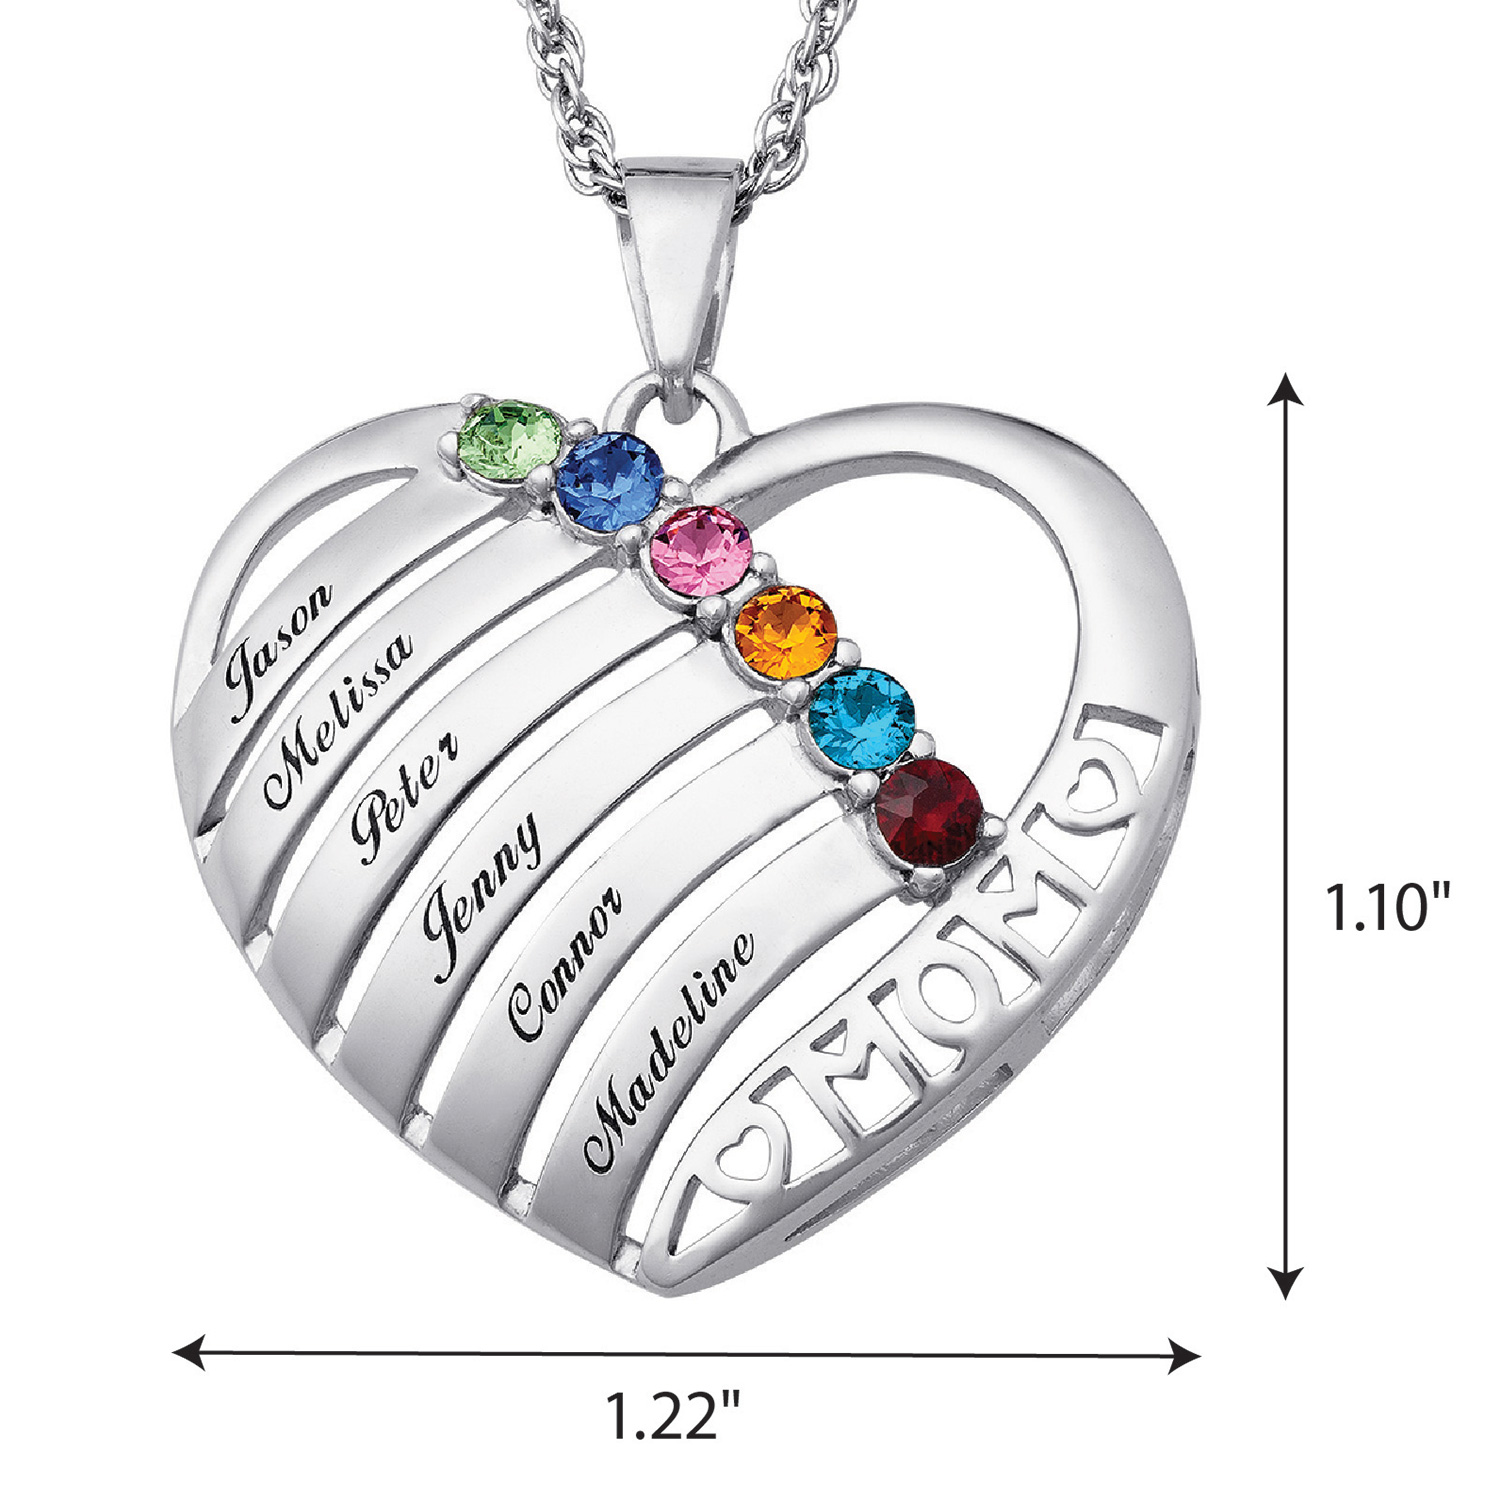 Family Jewelry Personalized Planet Mother's Mother Birthstone & Name Heart Necklace, 20" ,Women's - image 2 of 6